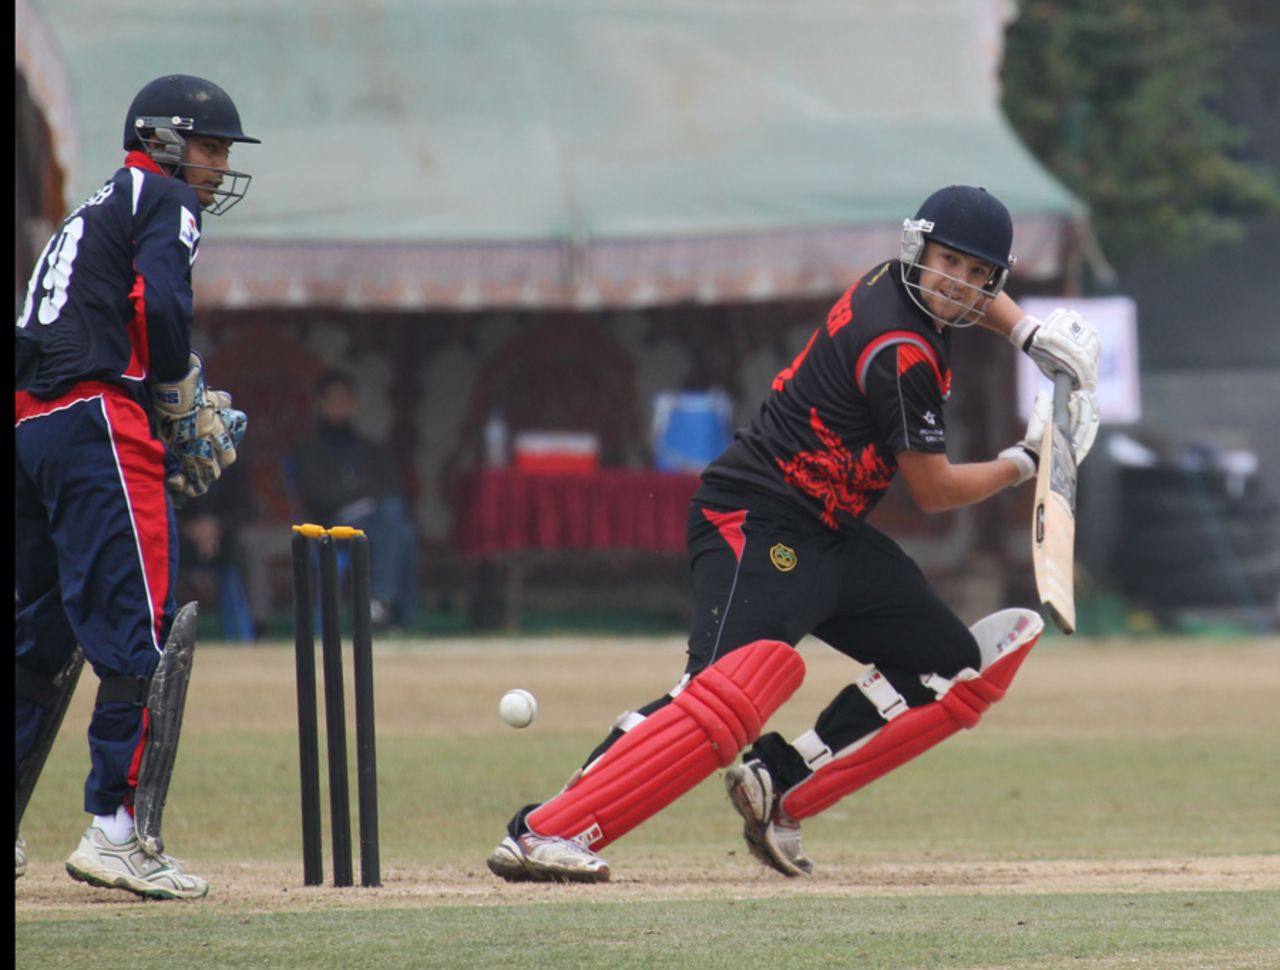 Courtney Kruger works the ball for a single against Nepal during the ACC Twenty20 Cup 2011 match played at Tribhuvan University Ground in Kathmandu on 3rd December 2011